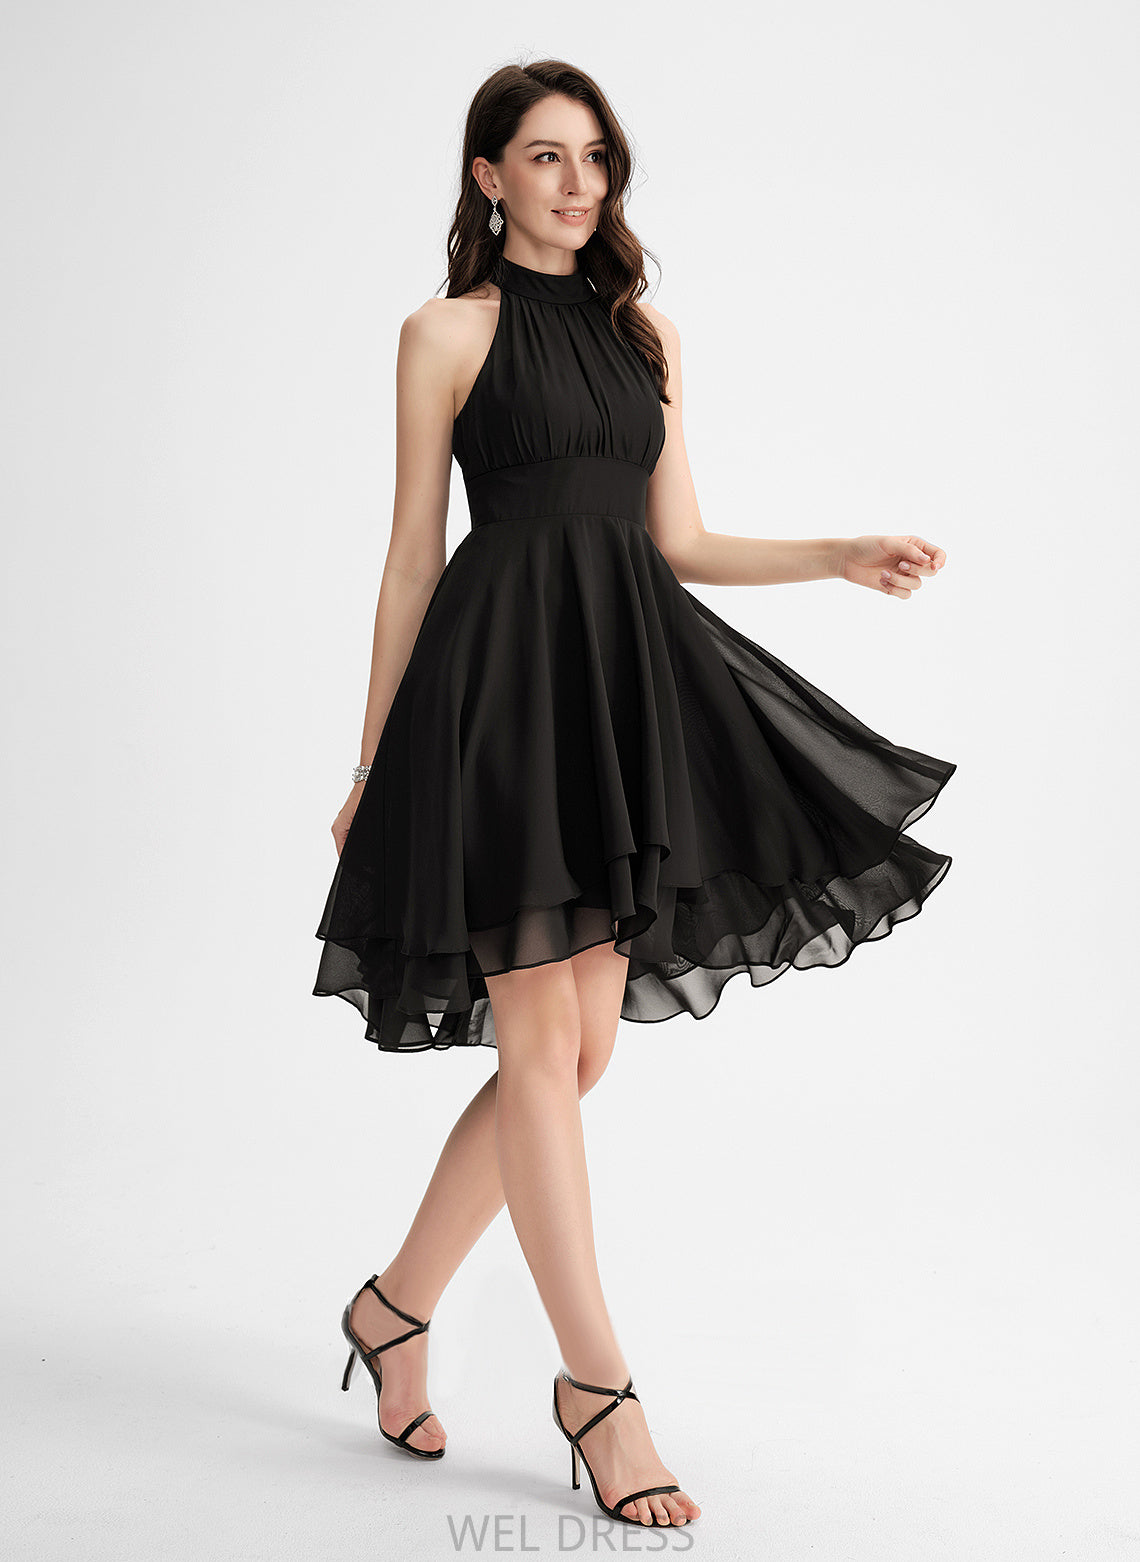 Scoop Homecoming Dresses Pleated Homecoming A-Line Asymmetrical Henrietta With Neck Chiffon Dress